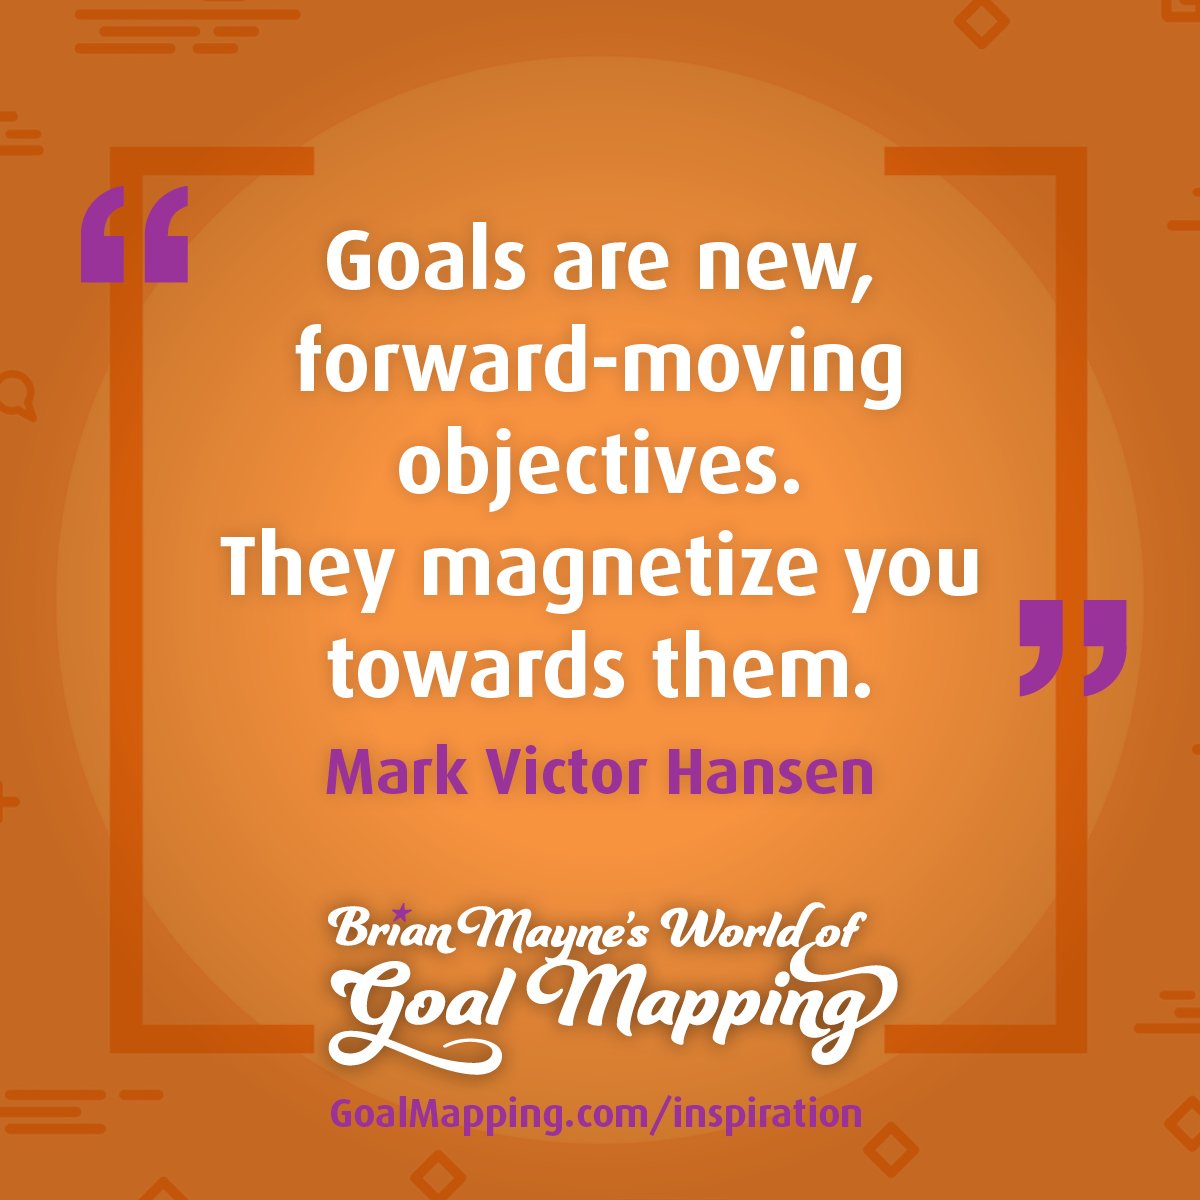 "Goals are new, forward-moving objectives. They magnetize you towards them." Mark Victor Hansen